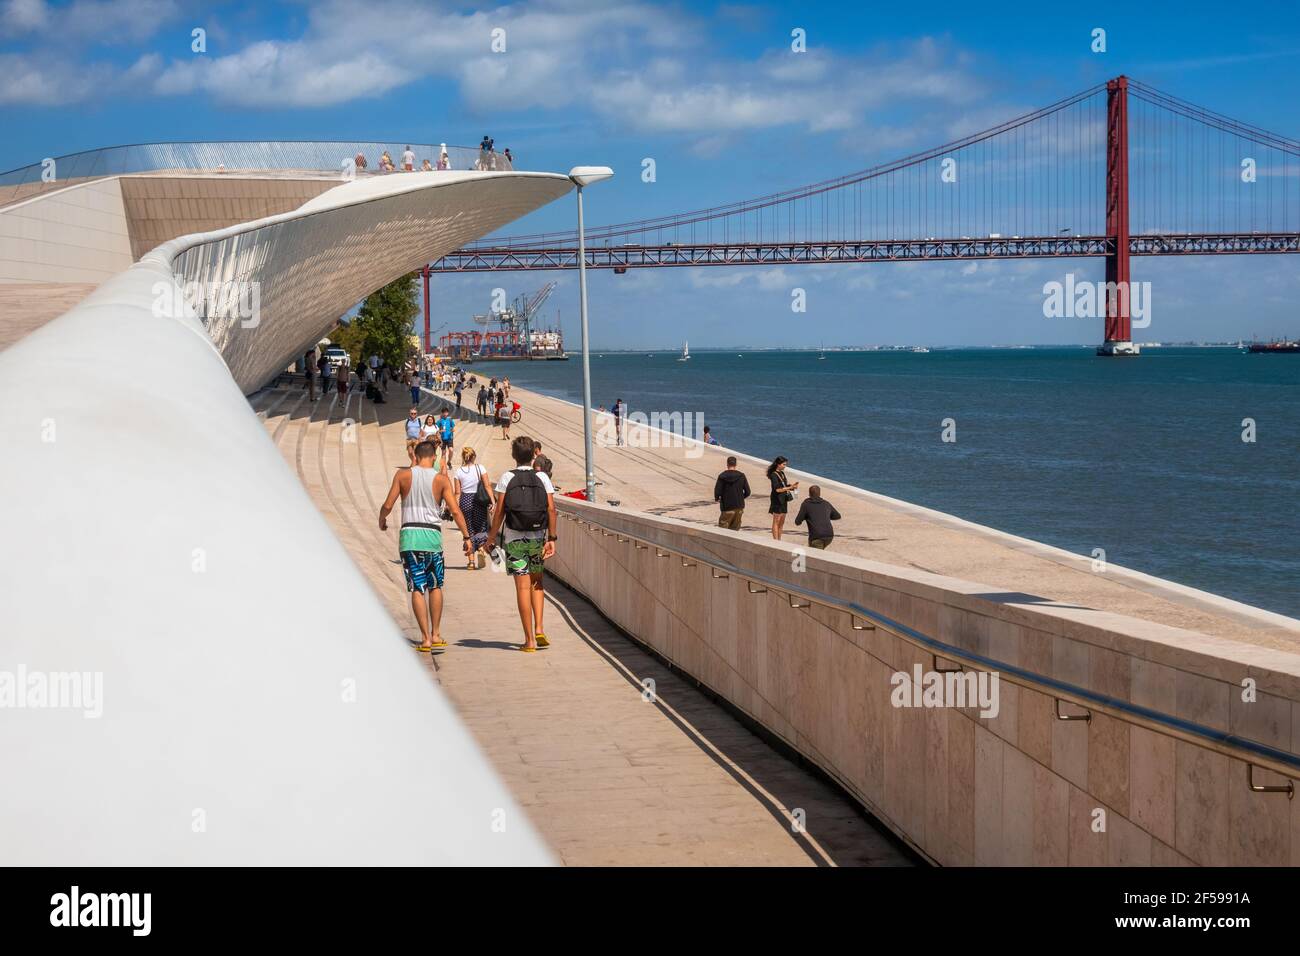 Museum of Art, Architecture and Technology with April 25 Bridge in the background spanning the River Tagus, Belem, Lisbon, Portugal Stock Photo